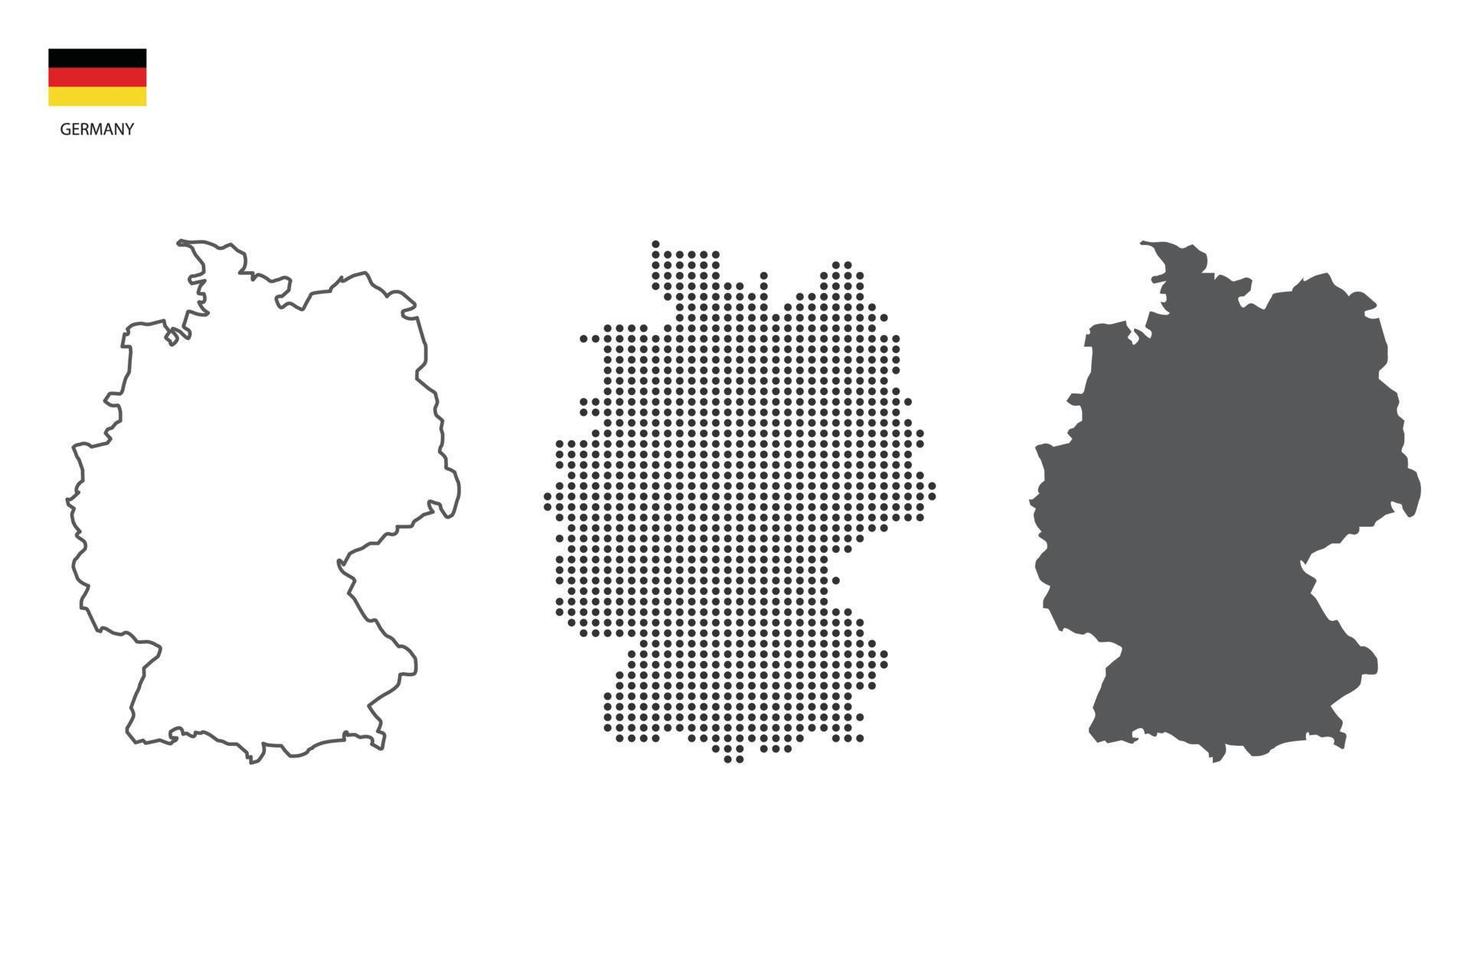 3 versions of Germany map city vector by thin black outline simplicity style, Black dot style and Dark shadow style. All in the white background.